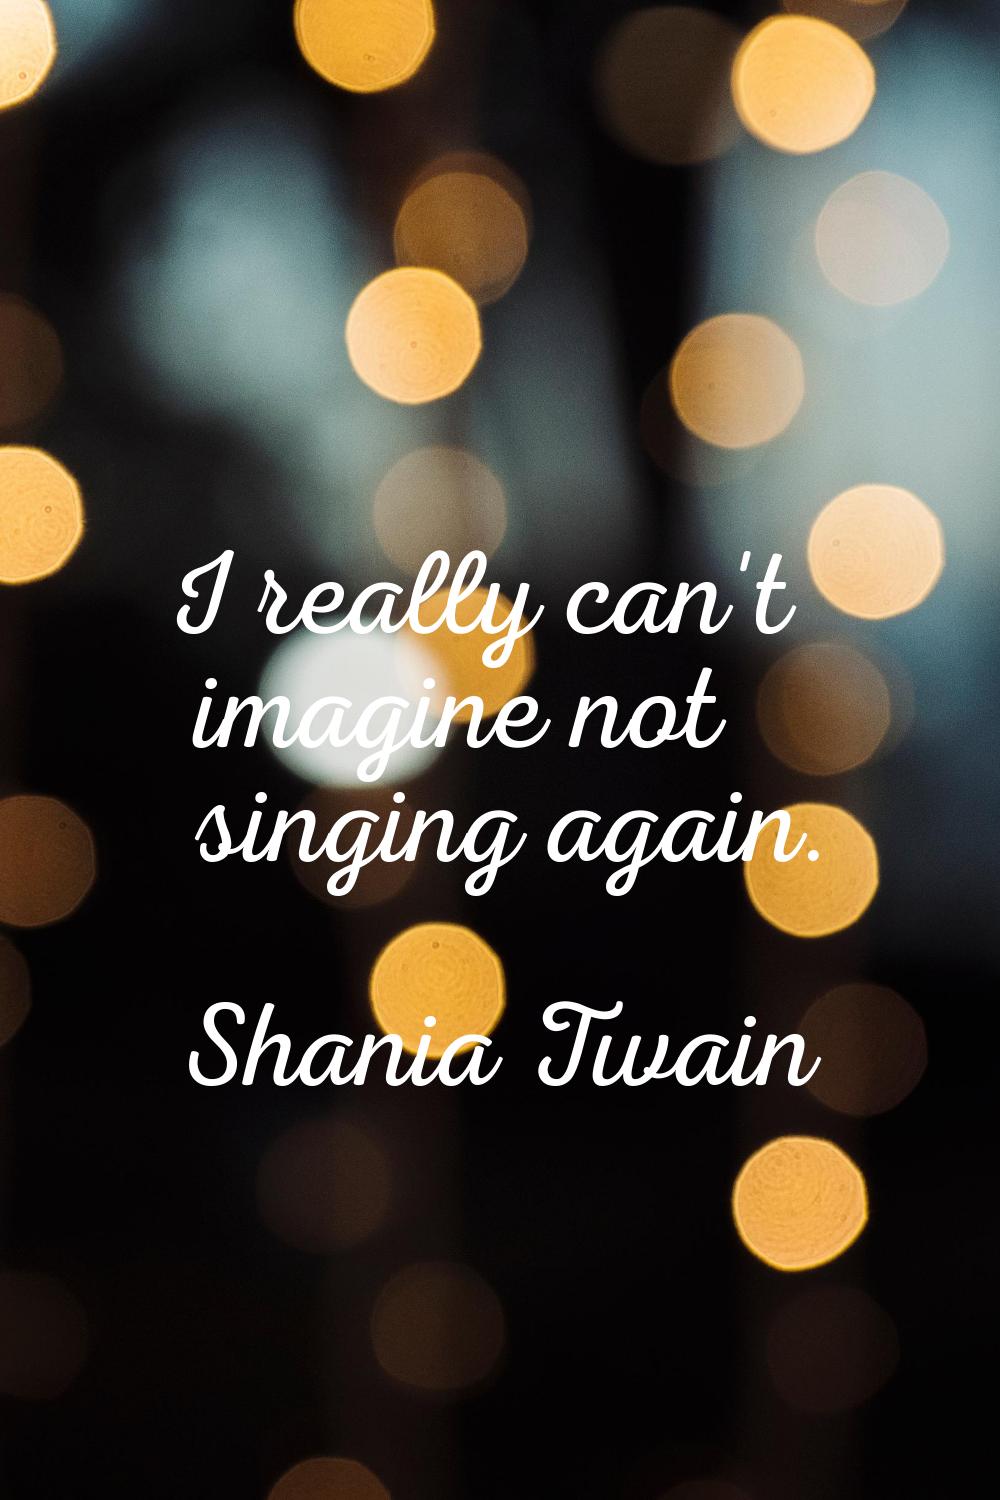 I really can't imagine not singing again.